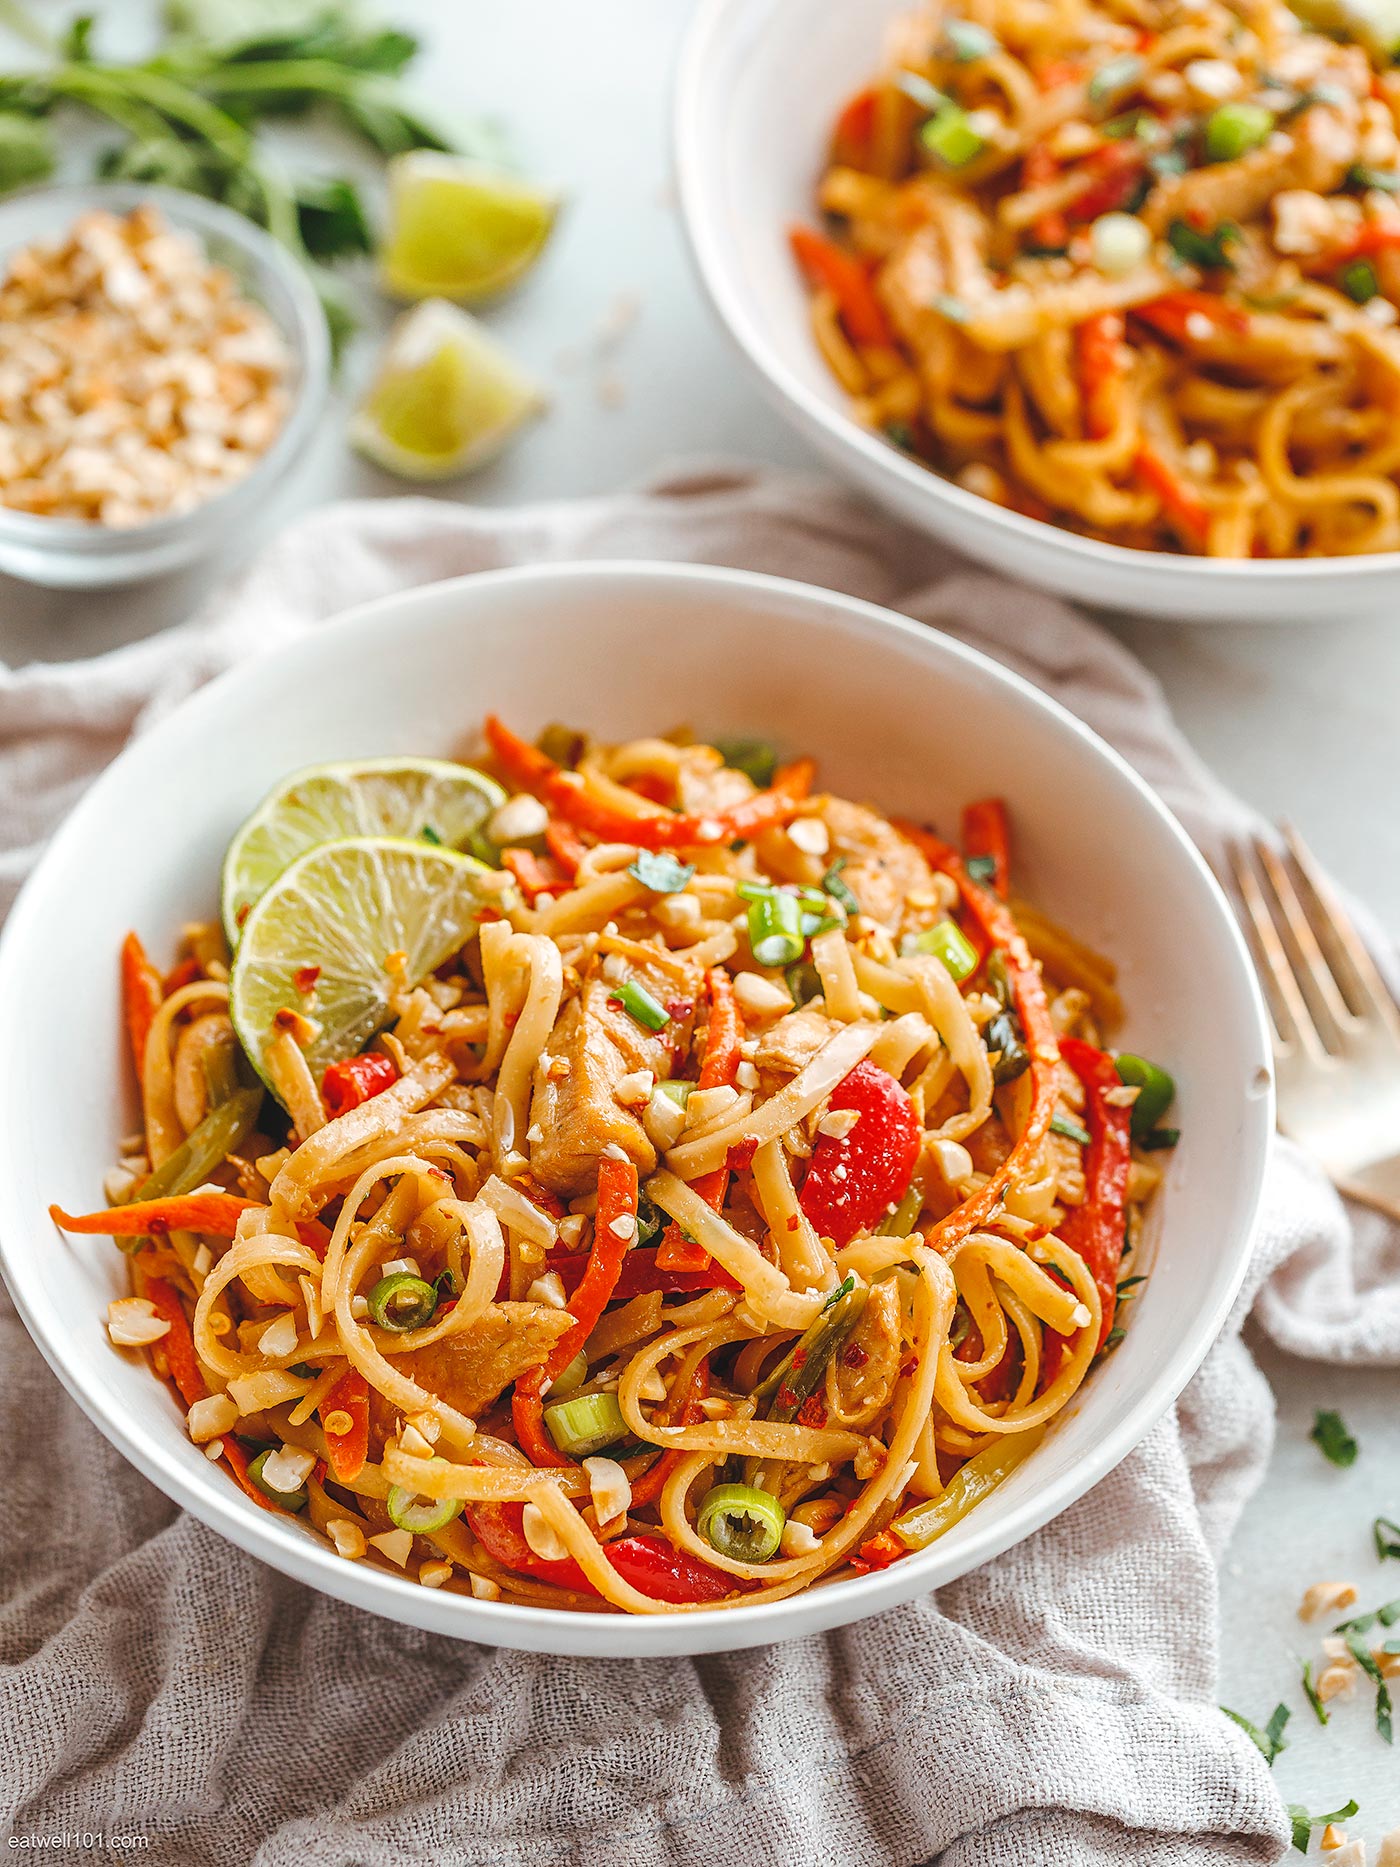 Vegetarian Pad Thai - Easy Skillet Recipe - Ministry of Curry